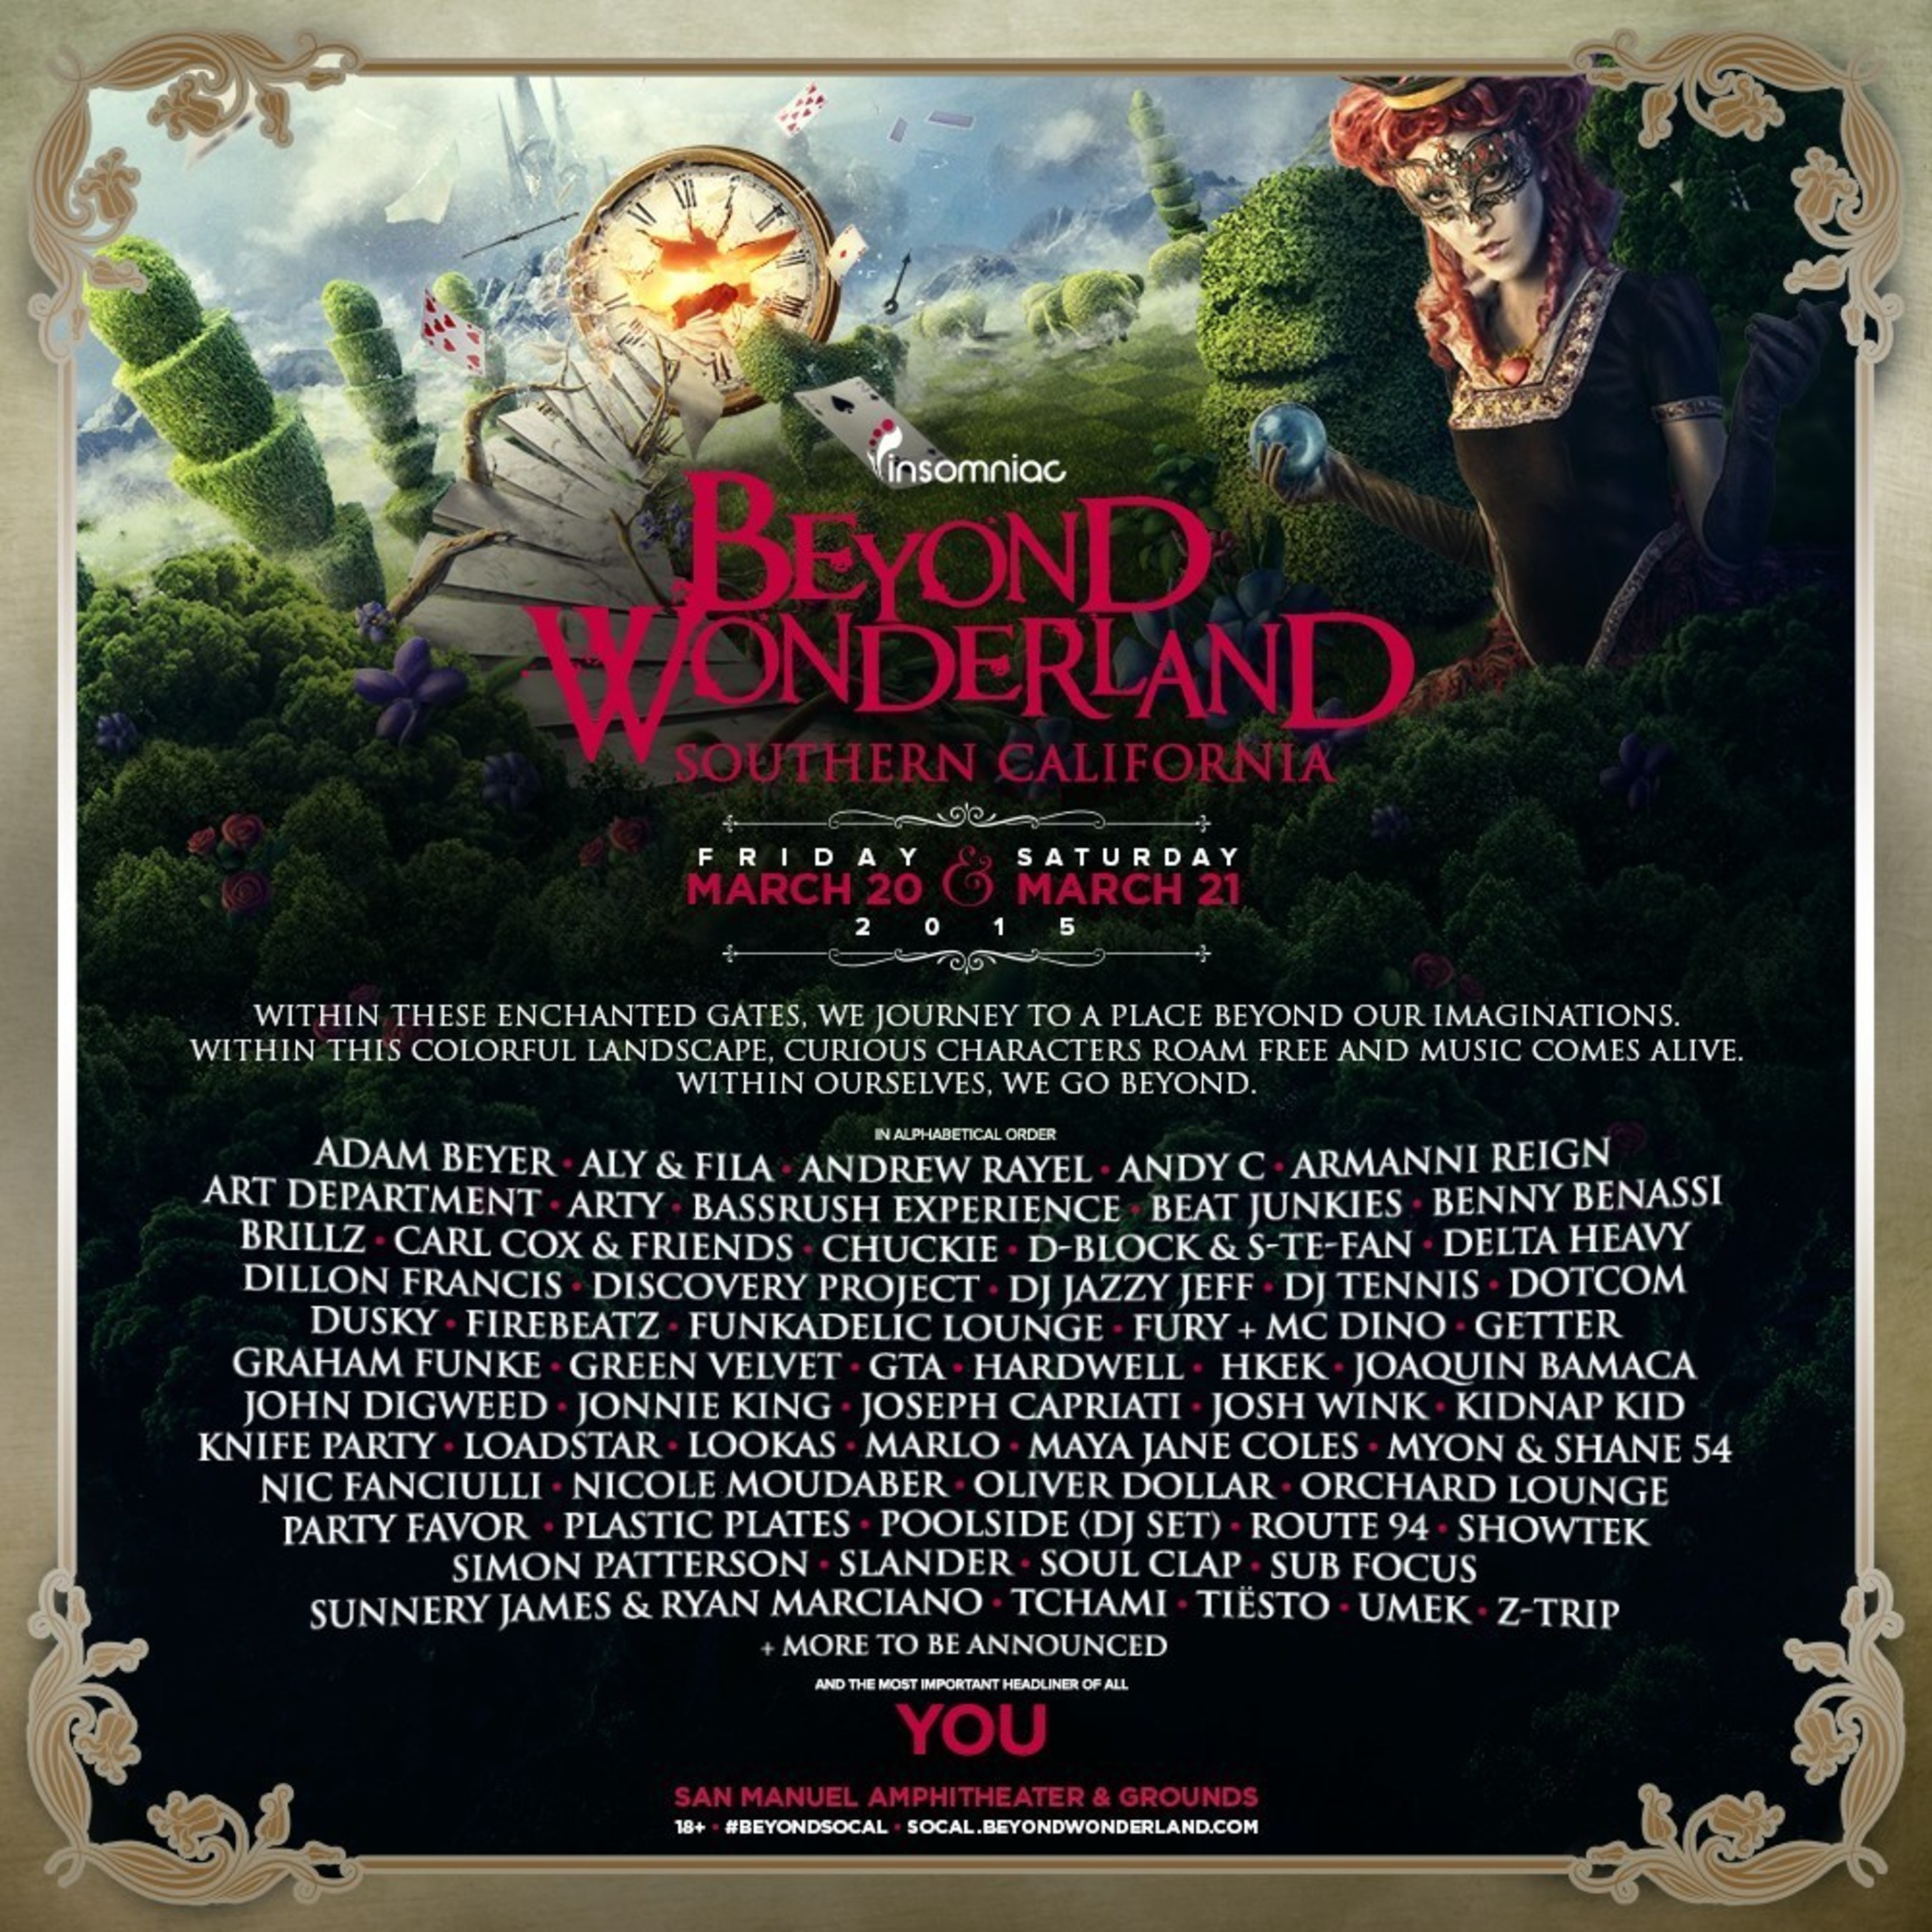 Insomniac Unveils Lineup for 2015 Beyond Wonderland, Southern California Taking Place March 20-21 at San Manuel Amphitheater & Grounds